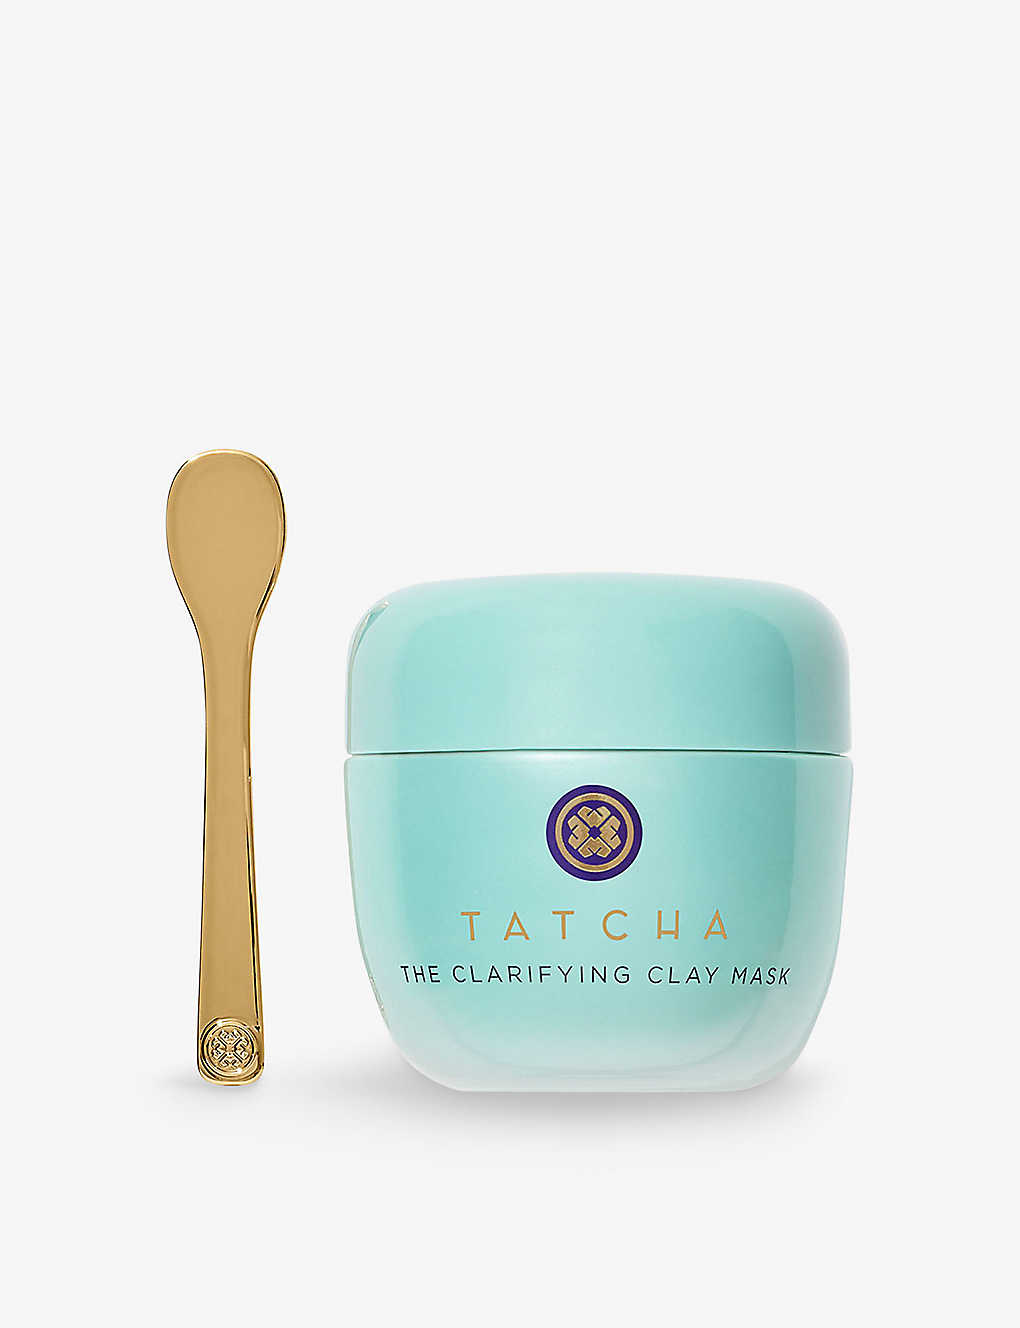 Tatcha The Clarifying Clay Mask In White